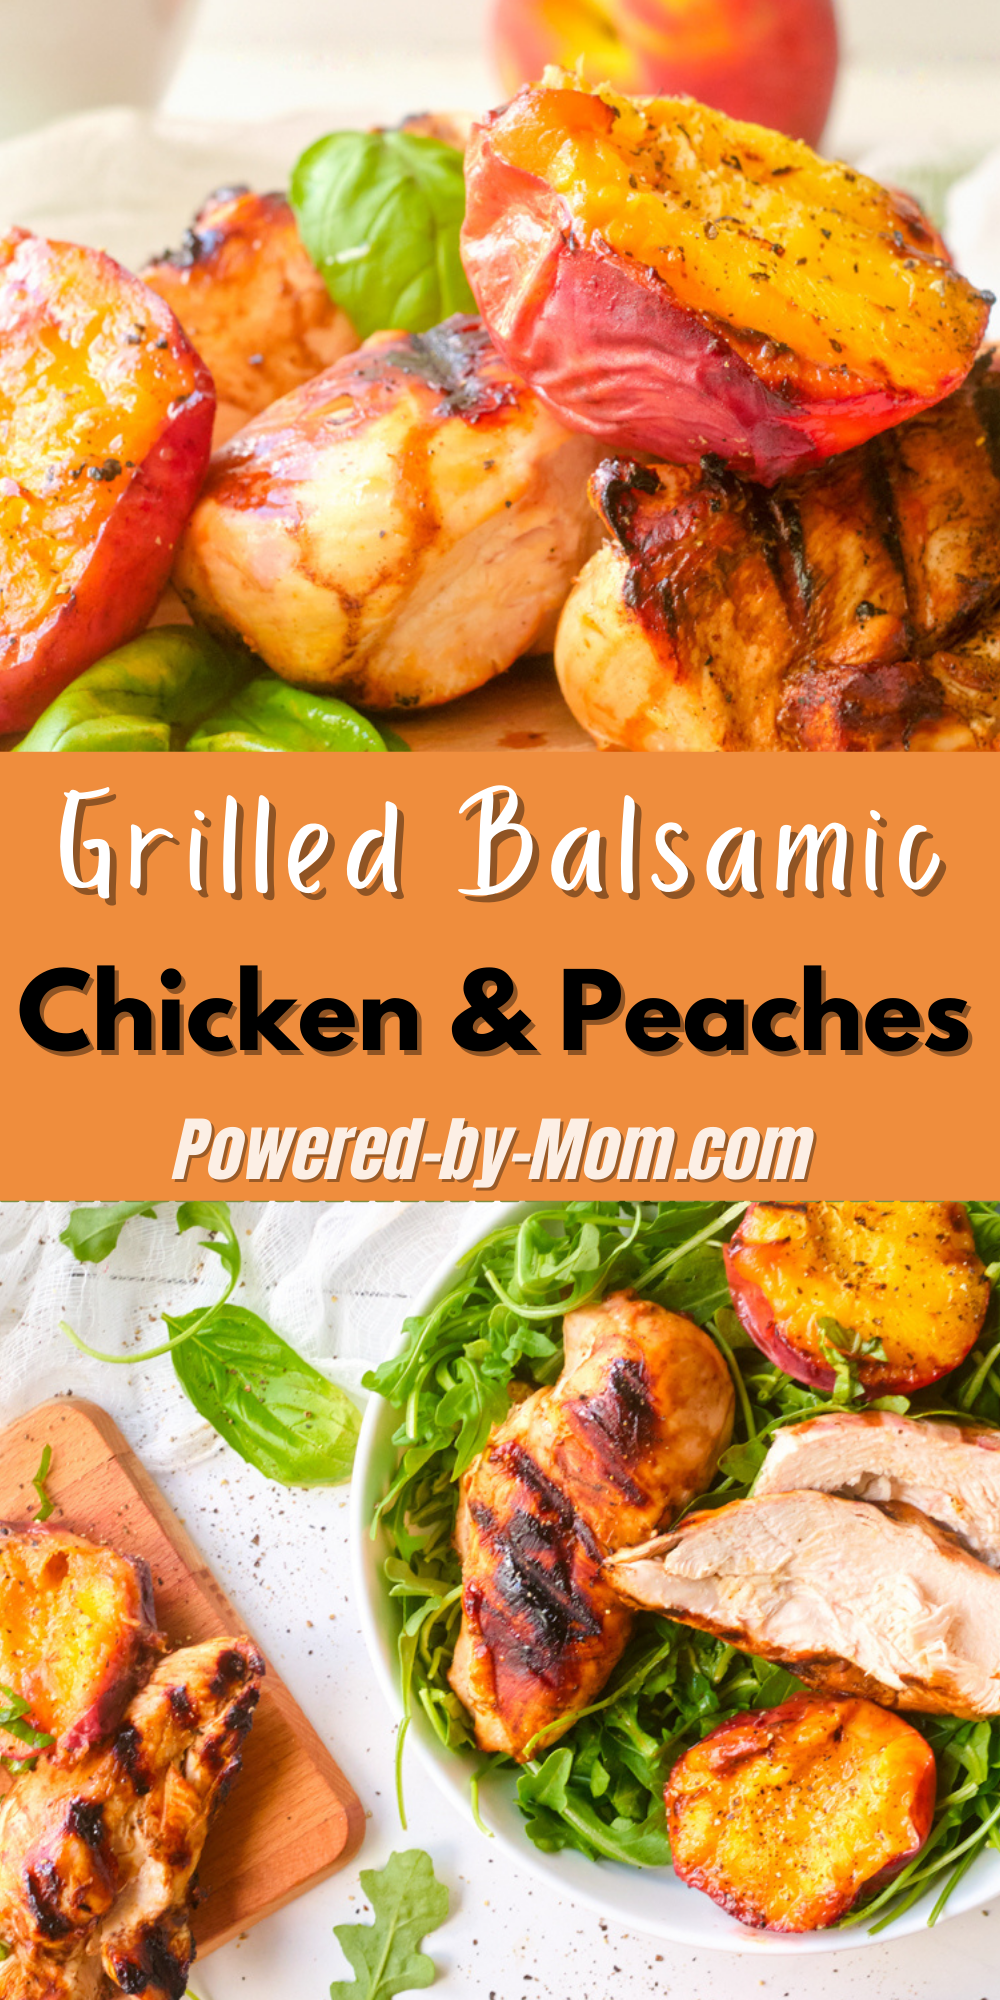 No oven needed. Make this grilled balsamic chicken and peaches on the BBQ and enjoy the leftovers cold on a salad or all by itself. 